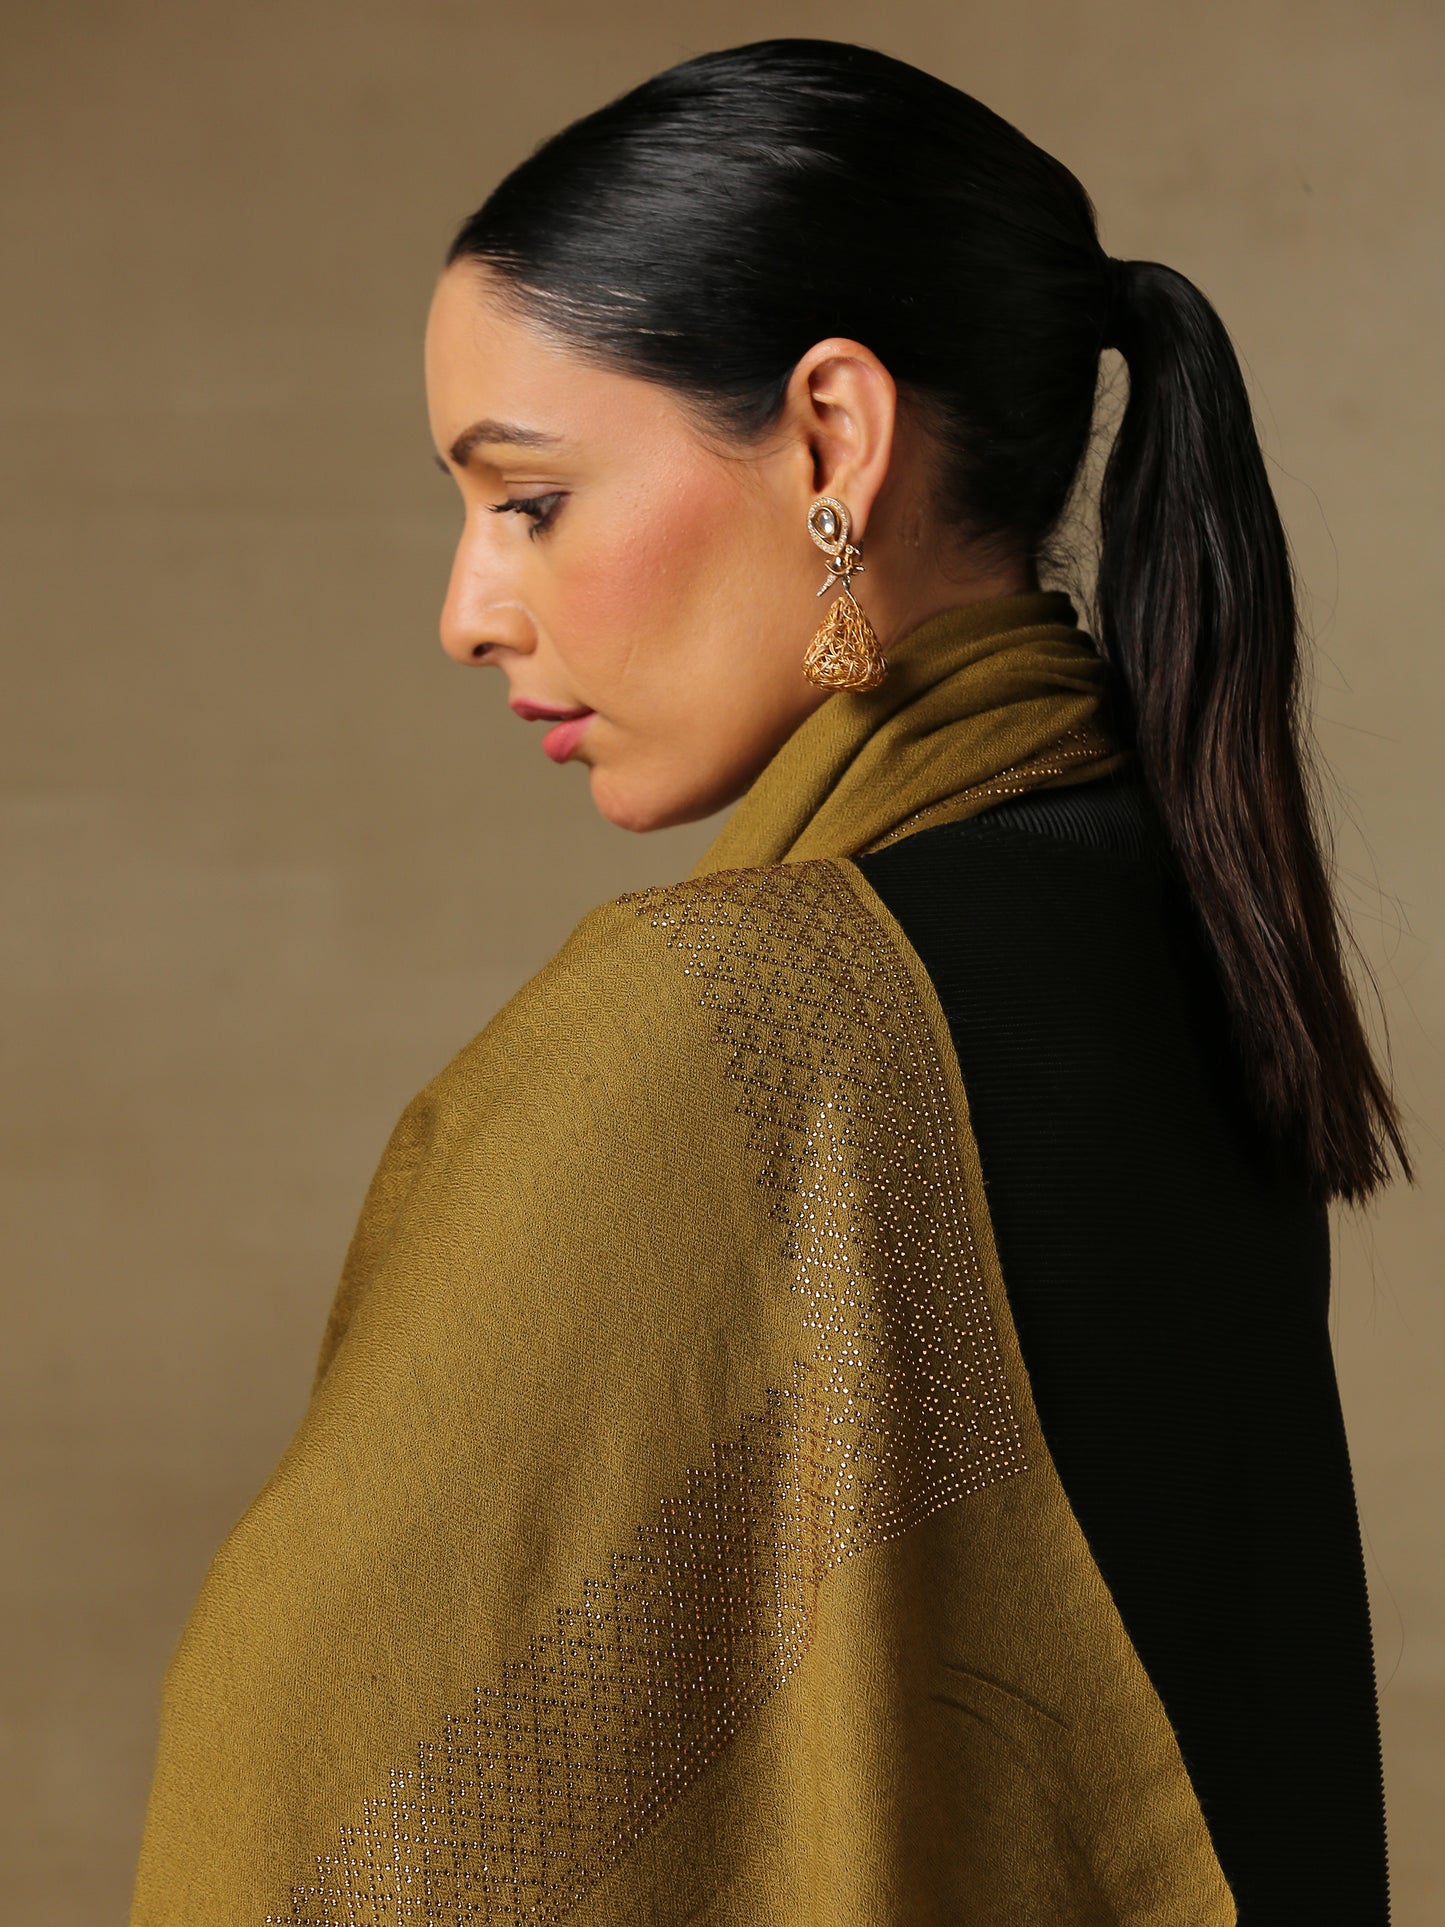 Model is wearing a henna coloured stole from the Era of Zaywar Border Swarovski Stole collection, hand embellished with gold swarovski in a cubes design. 